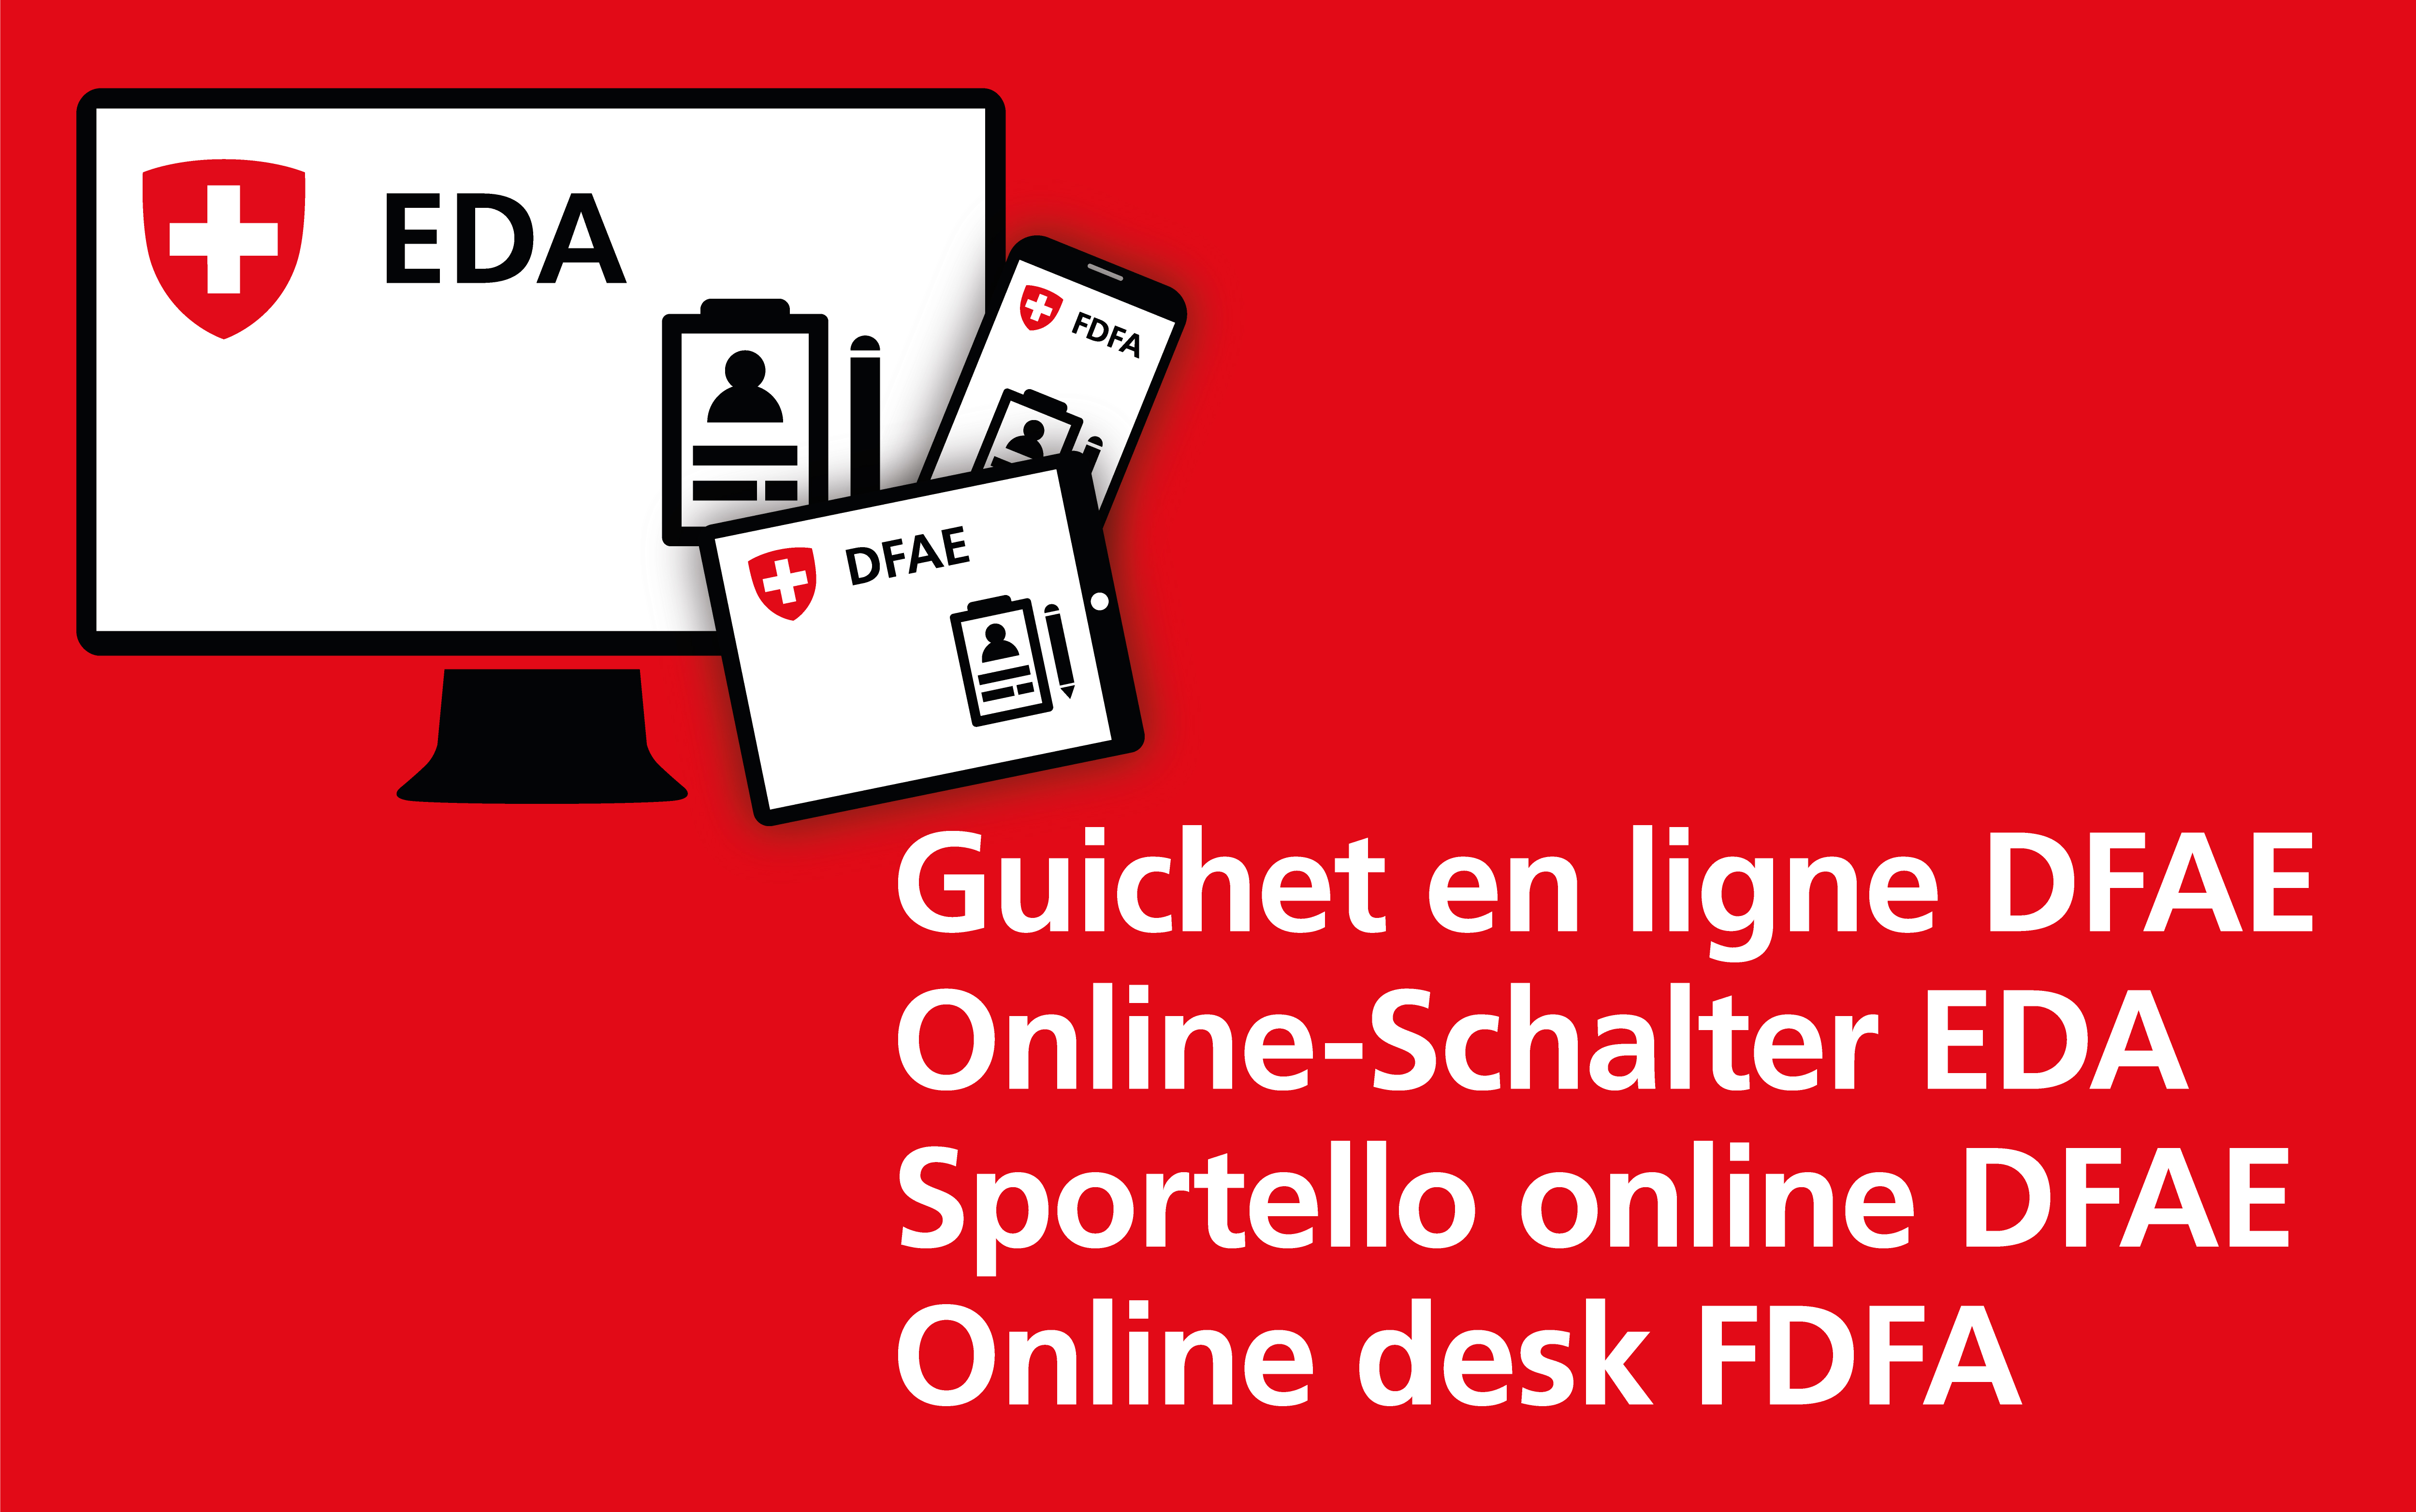 The logo of the FDFA’s online desk in four languages 